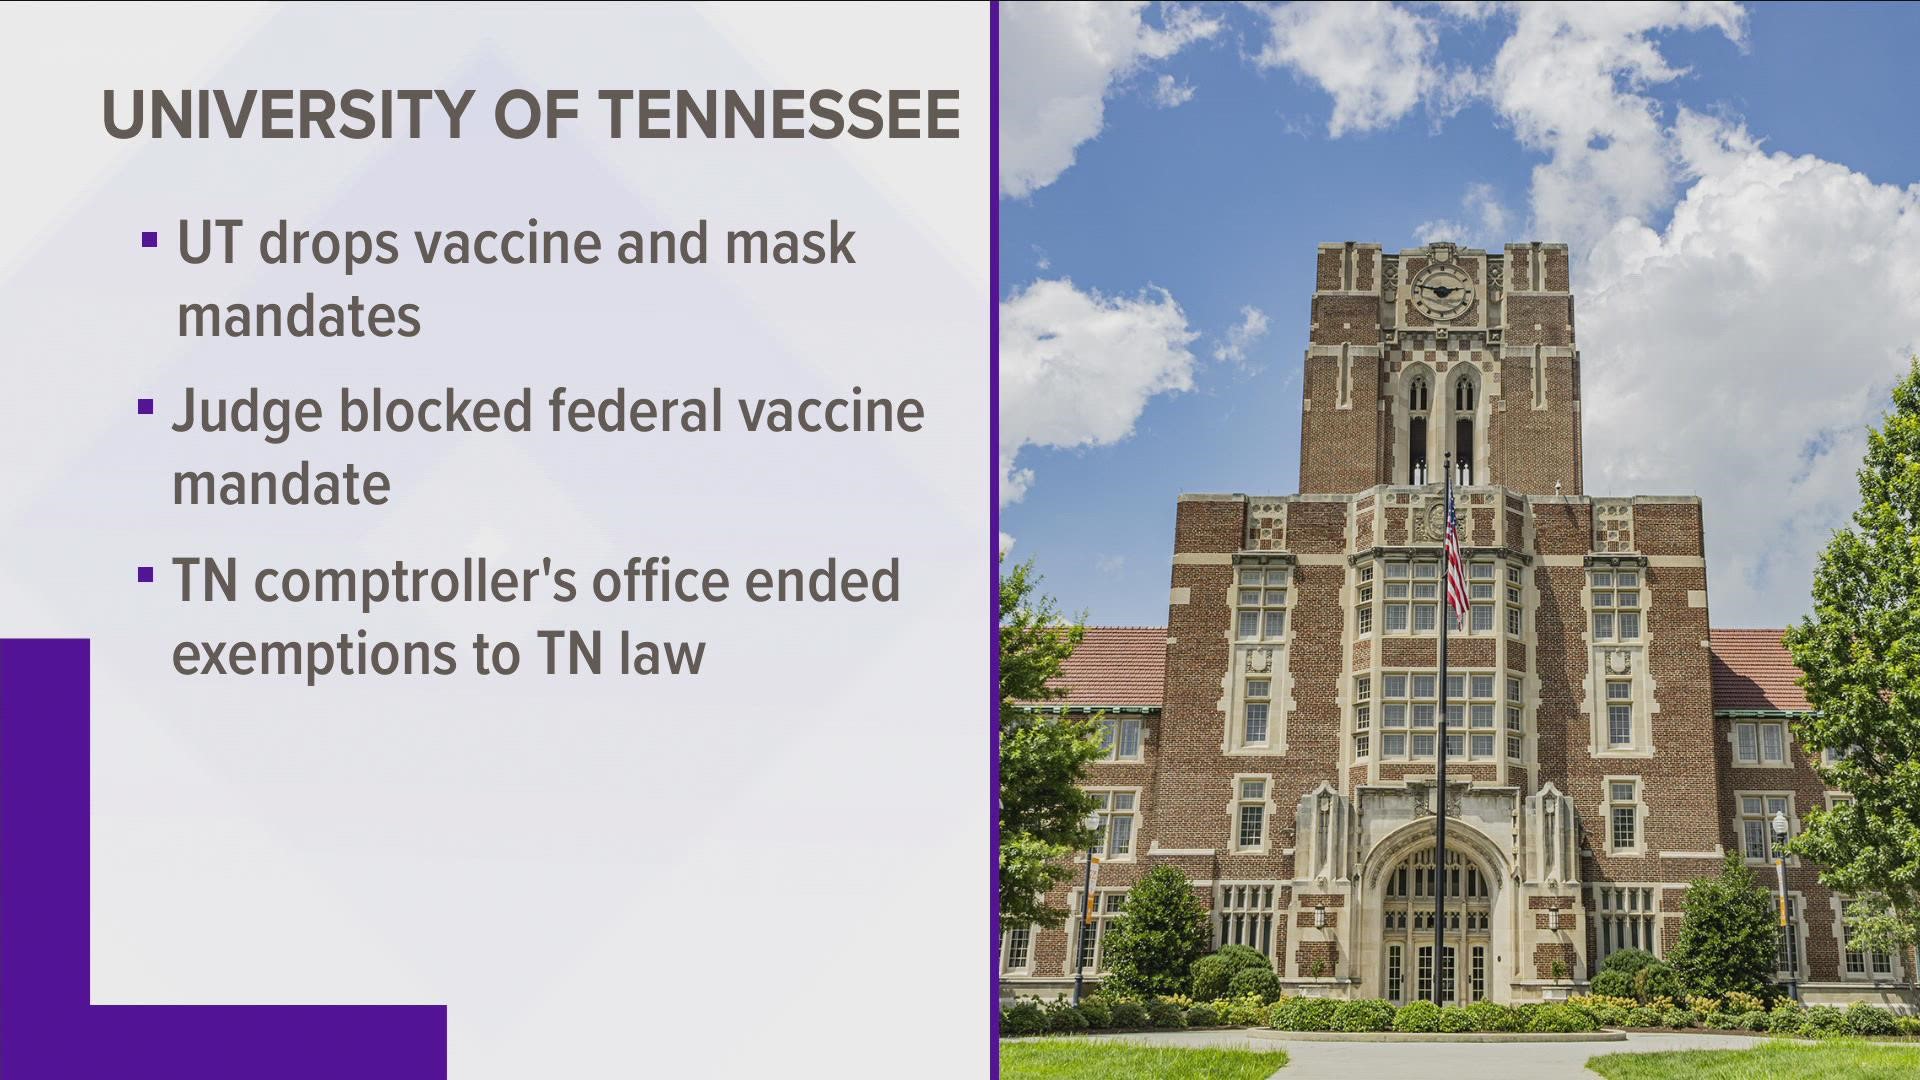 On Wednesday, UT Knoxville sent another letter letting faculty, staff and students know they would be dropping COVID-19 mask and vaccine rules again.